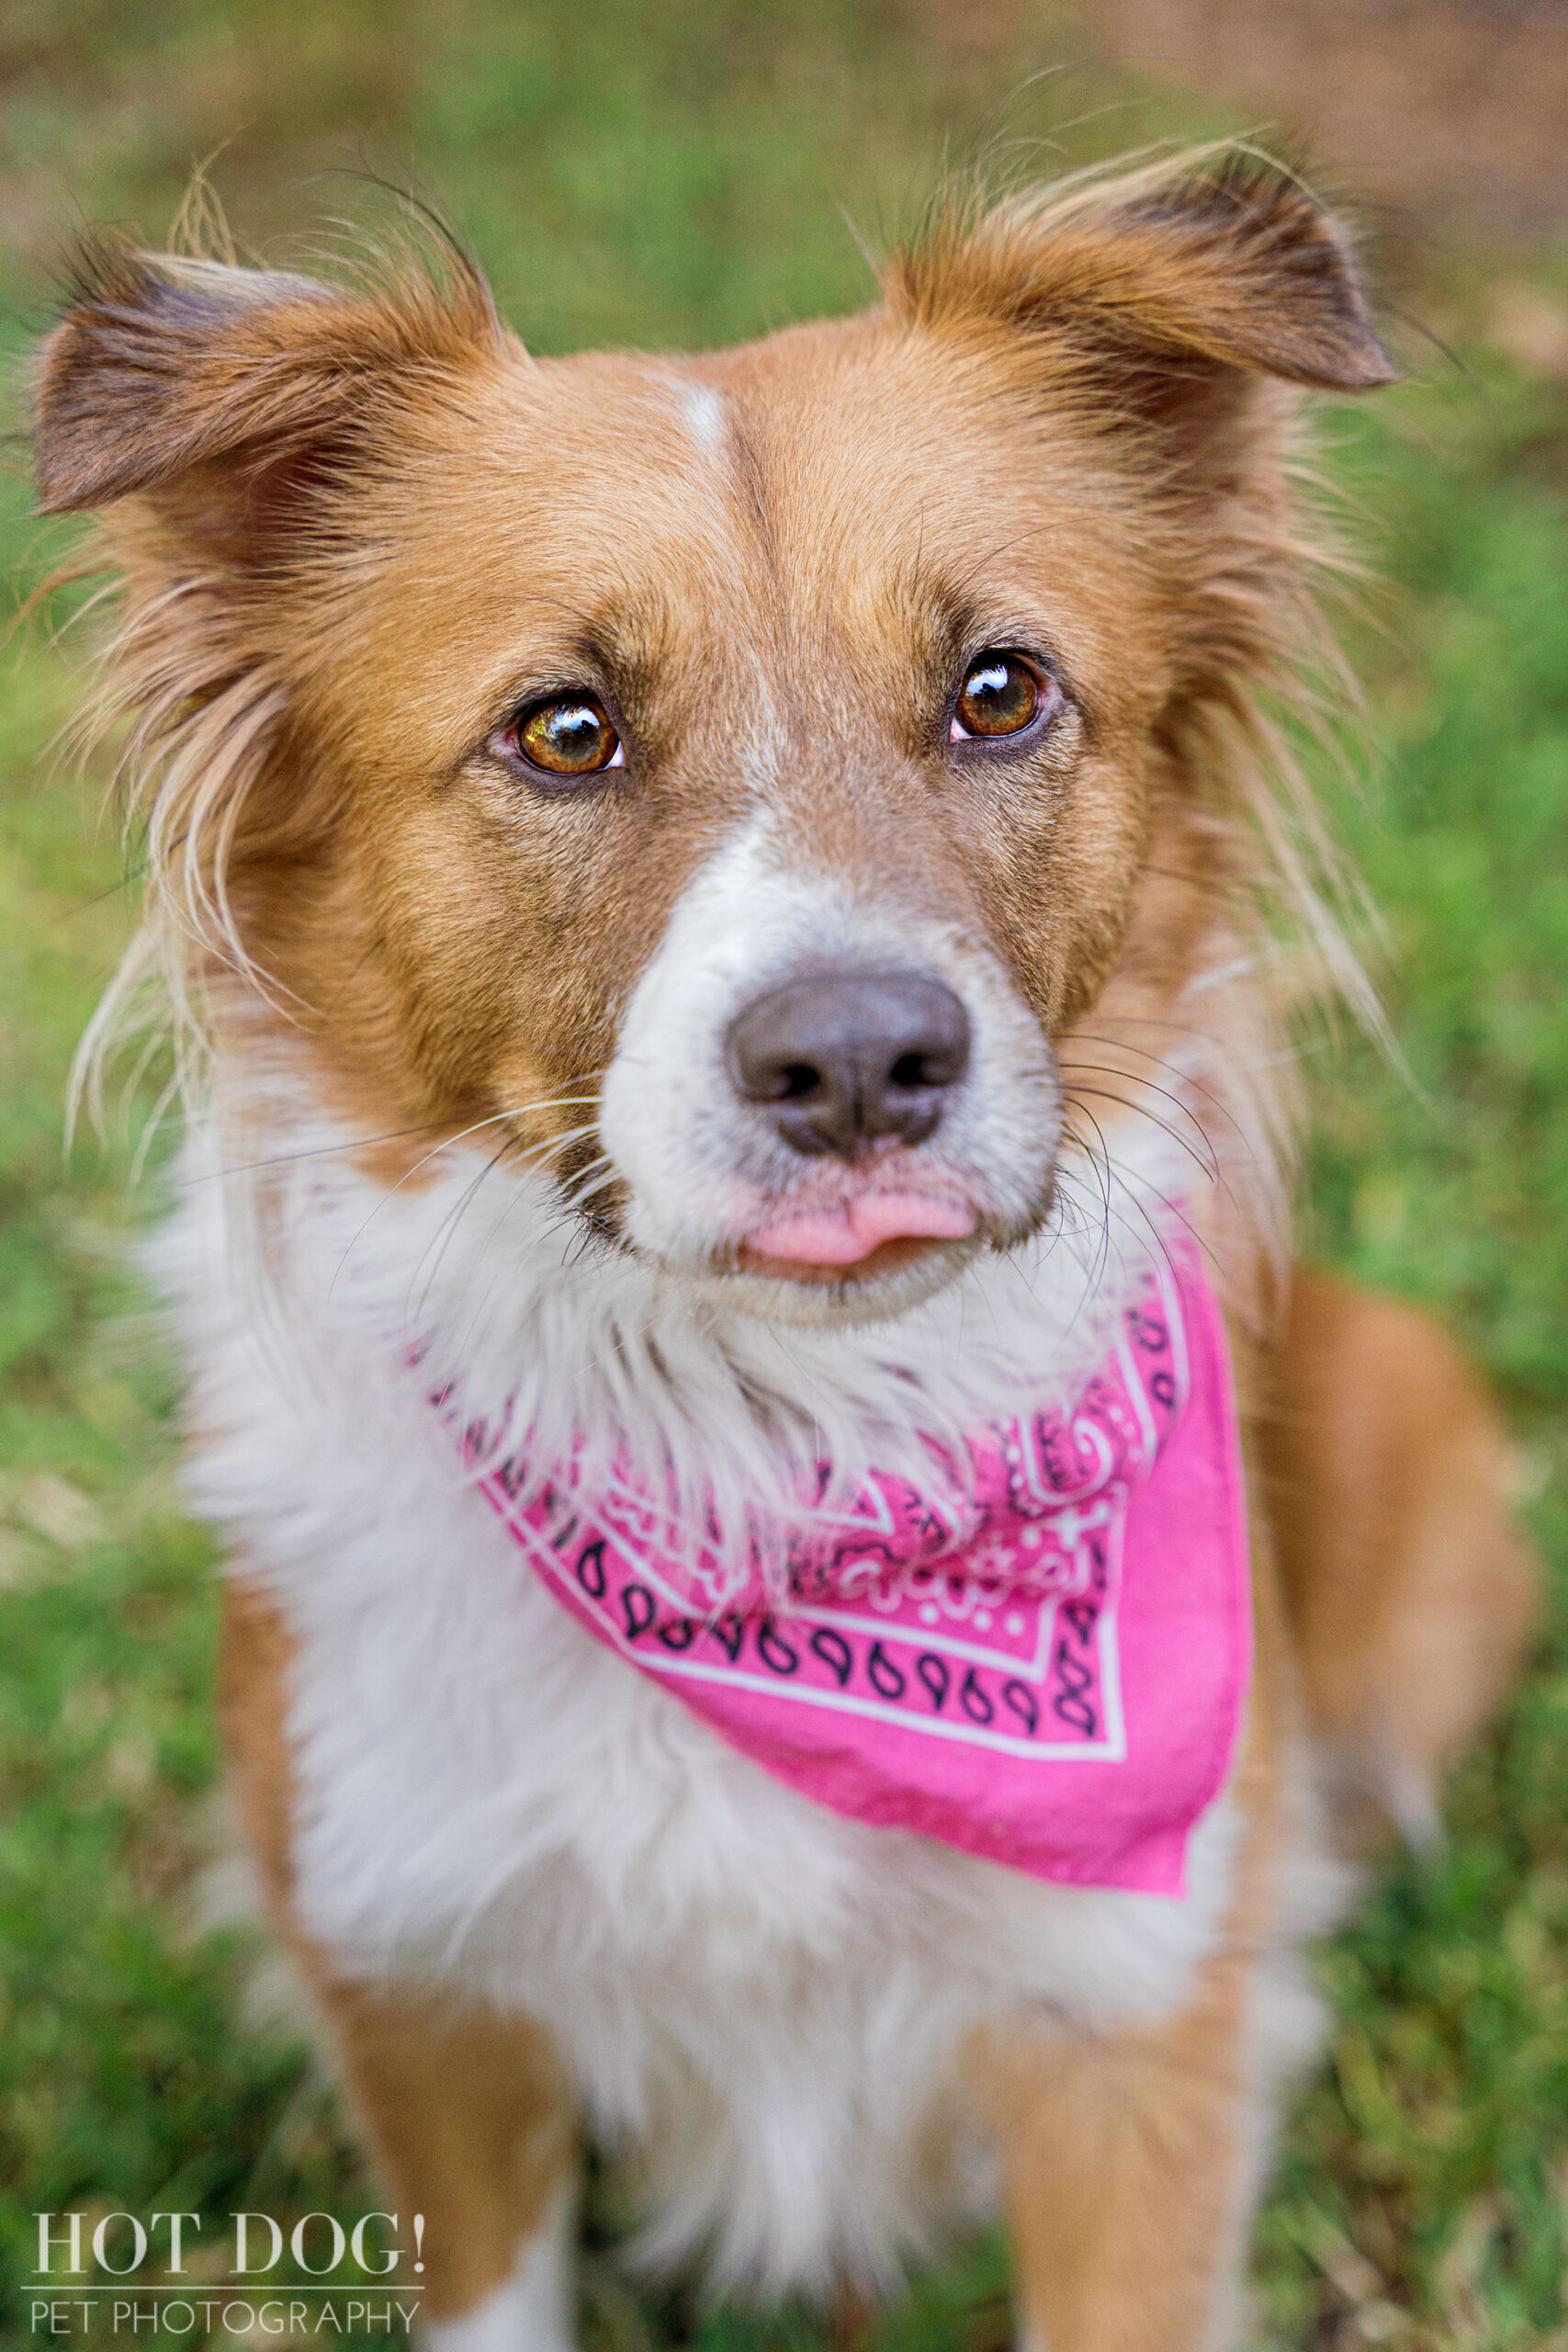 Cambrie the rescue dog is the star of this professional pet photo session by Hot Dog! Pet Photography.